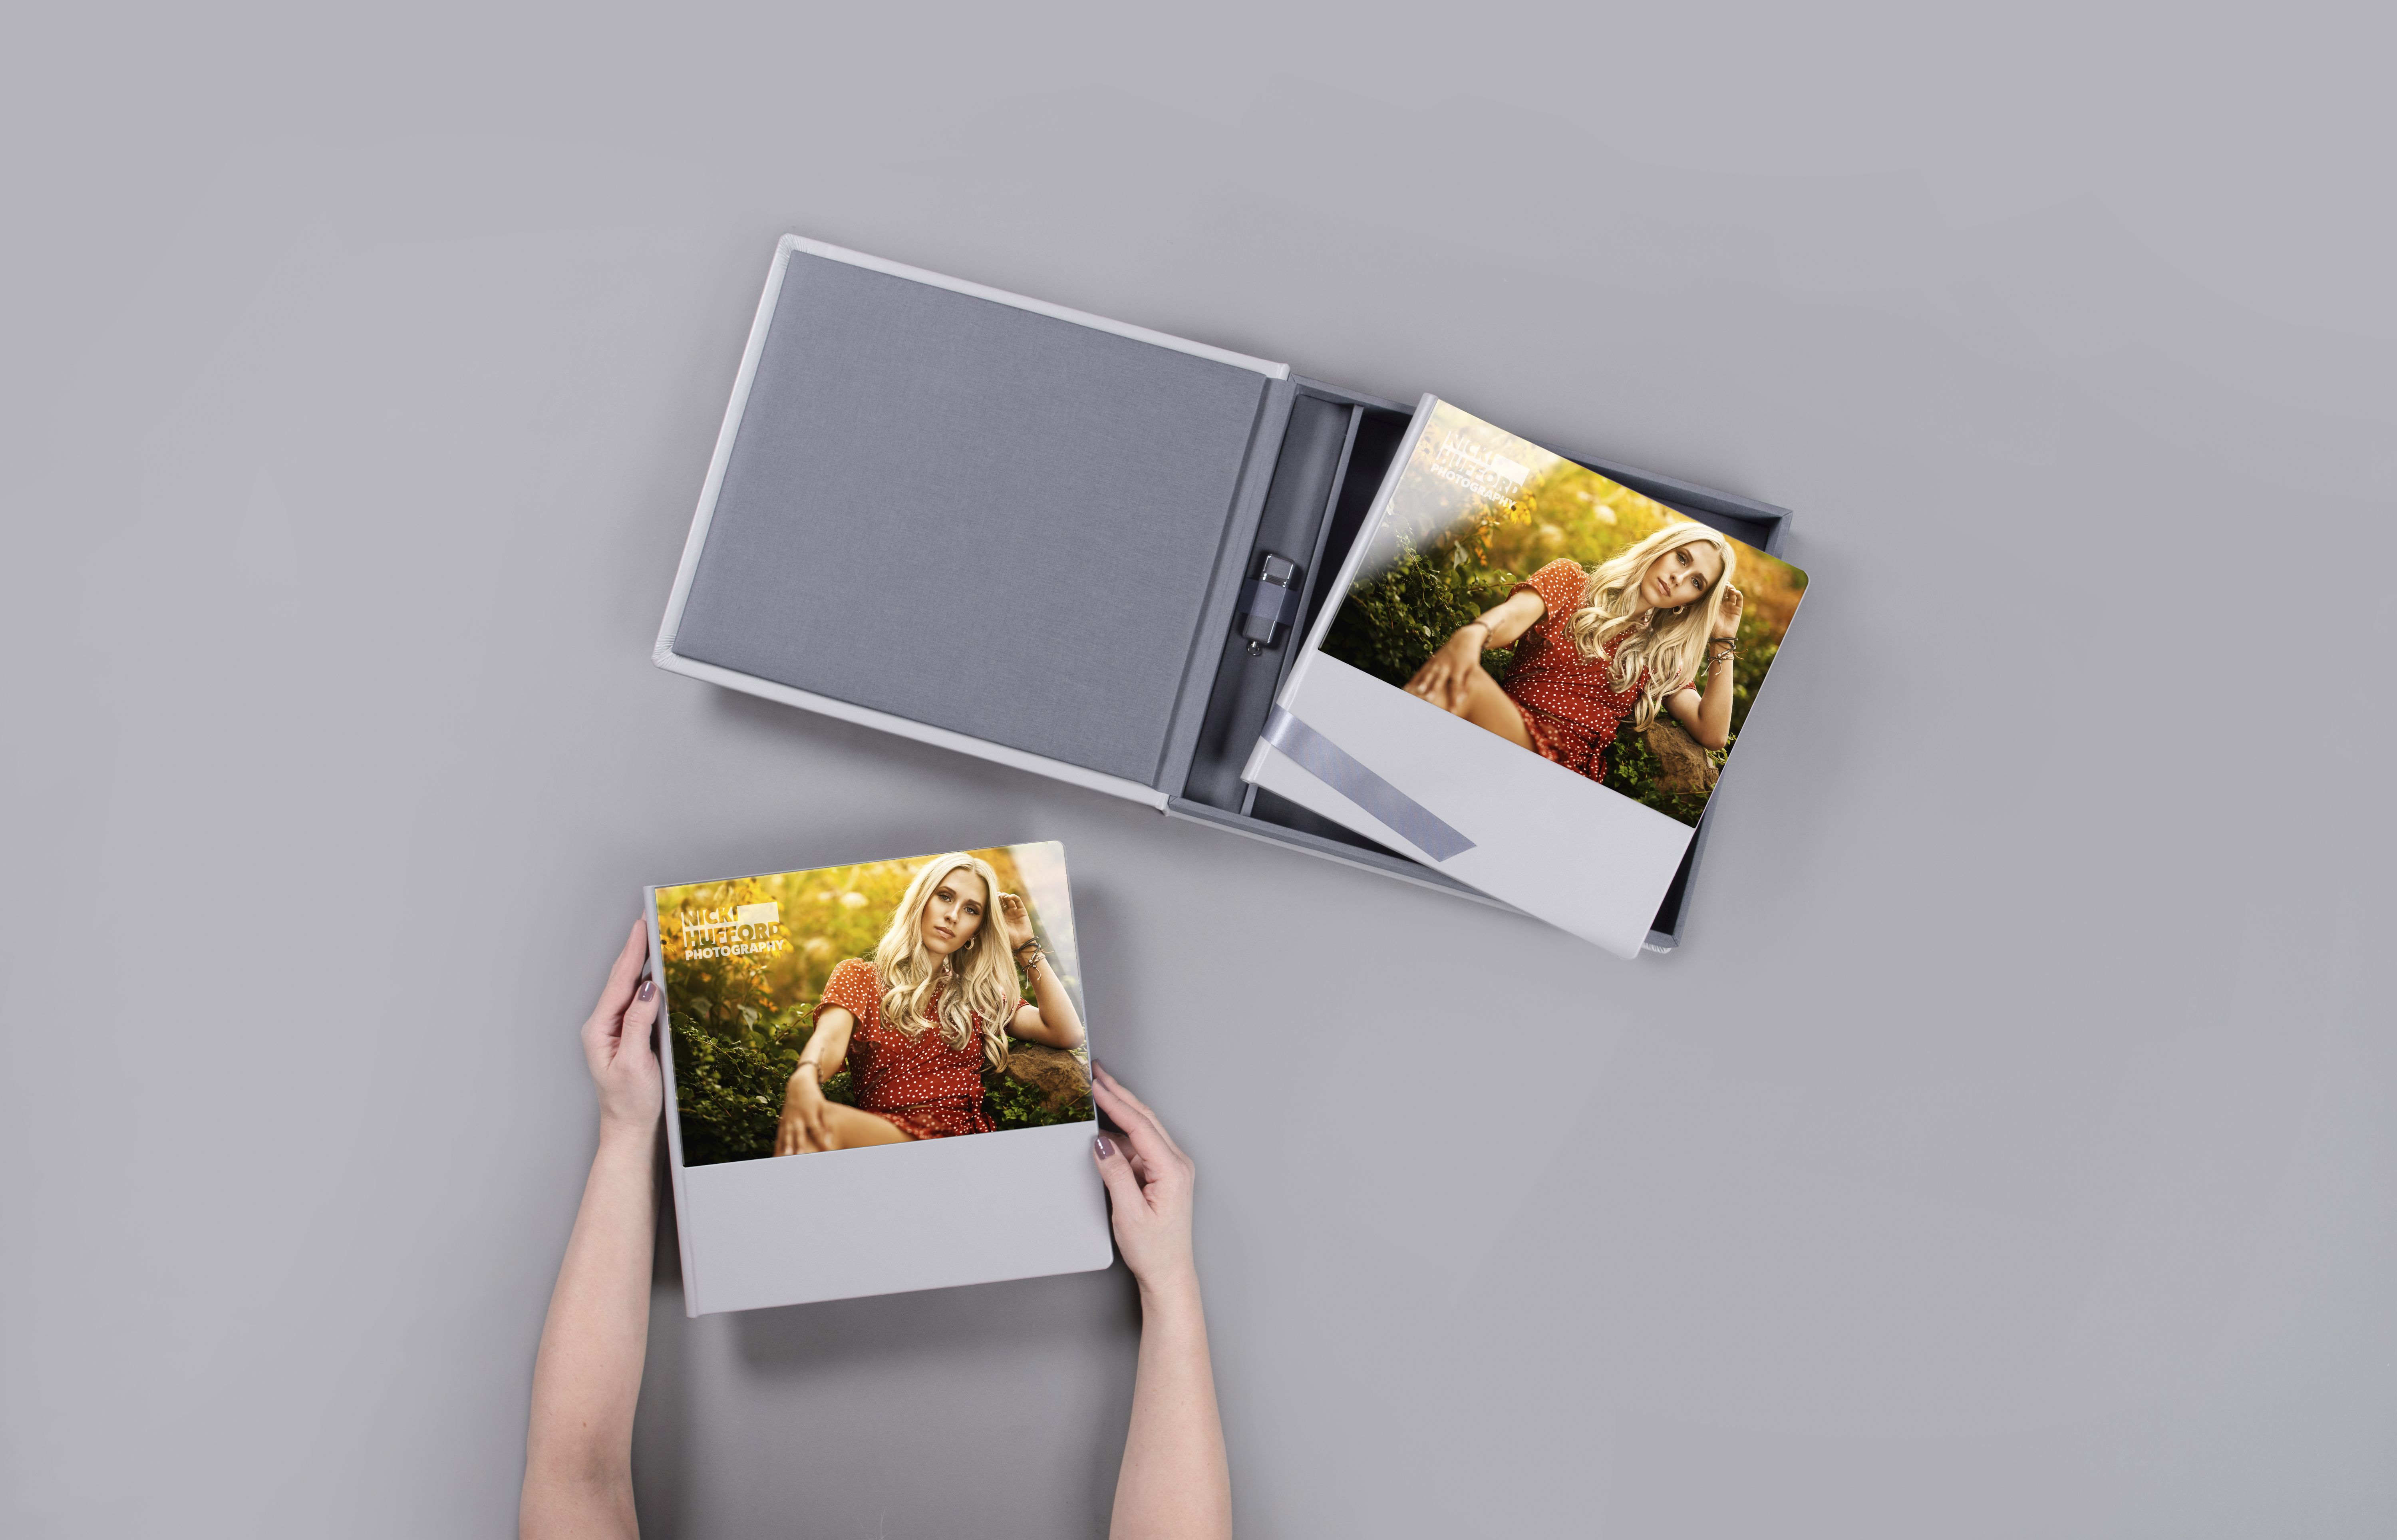 Photo Albums with Acrylic Covers and USB Memory Sticks